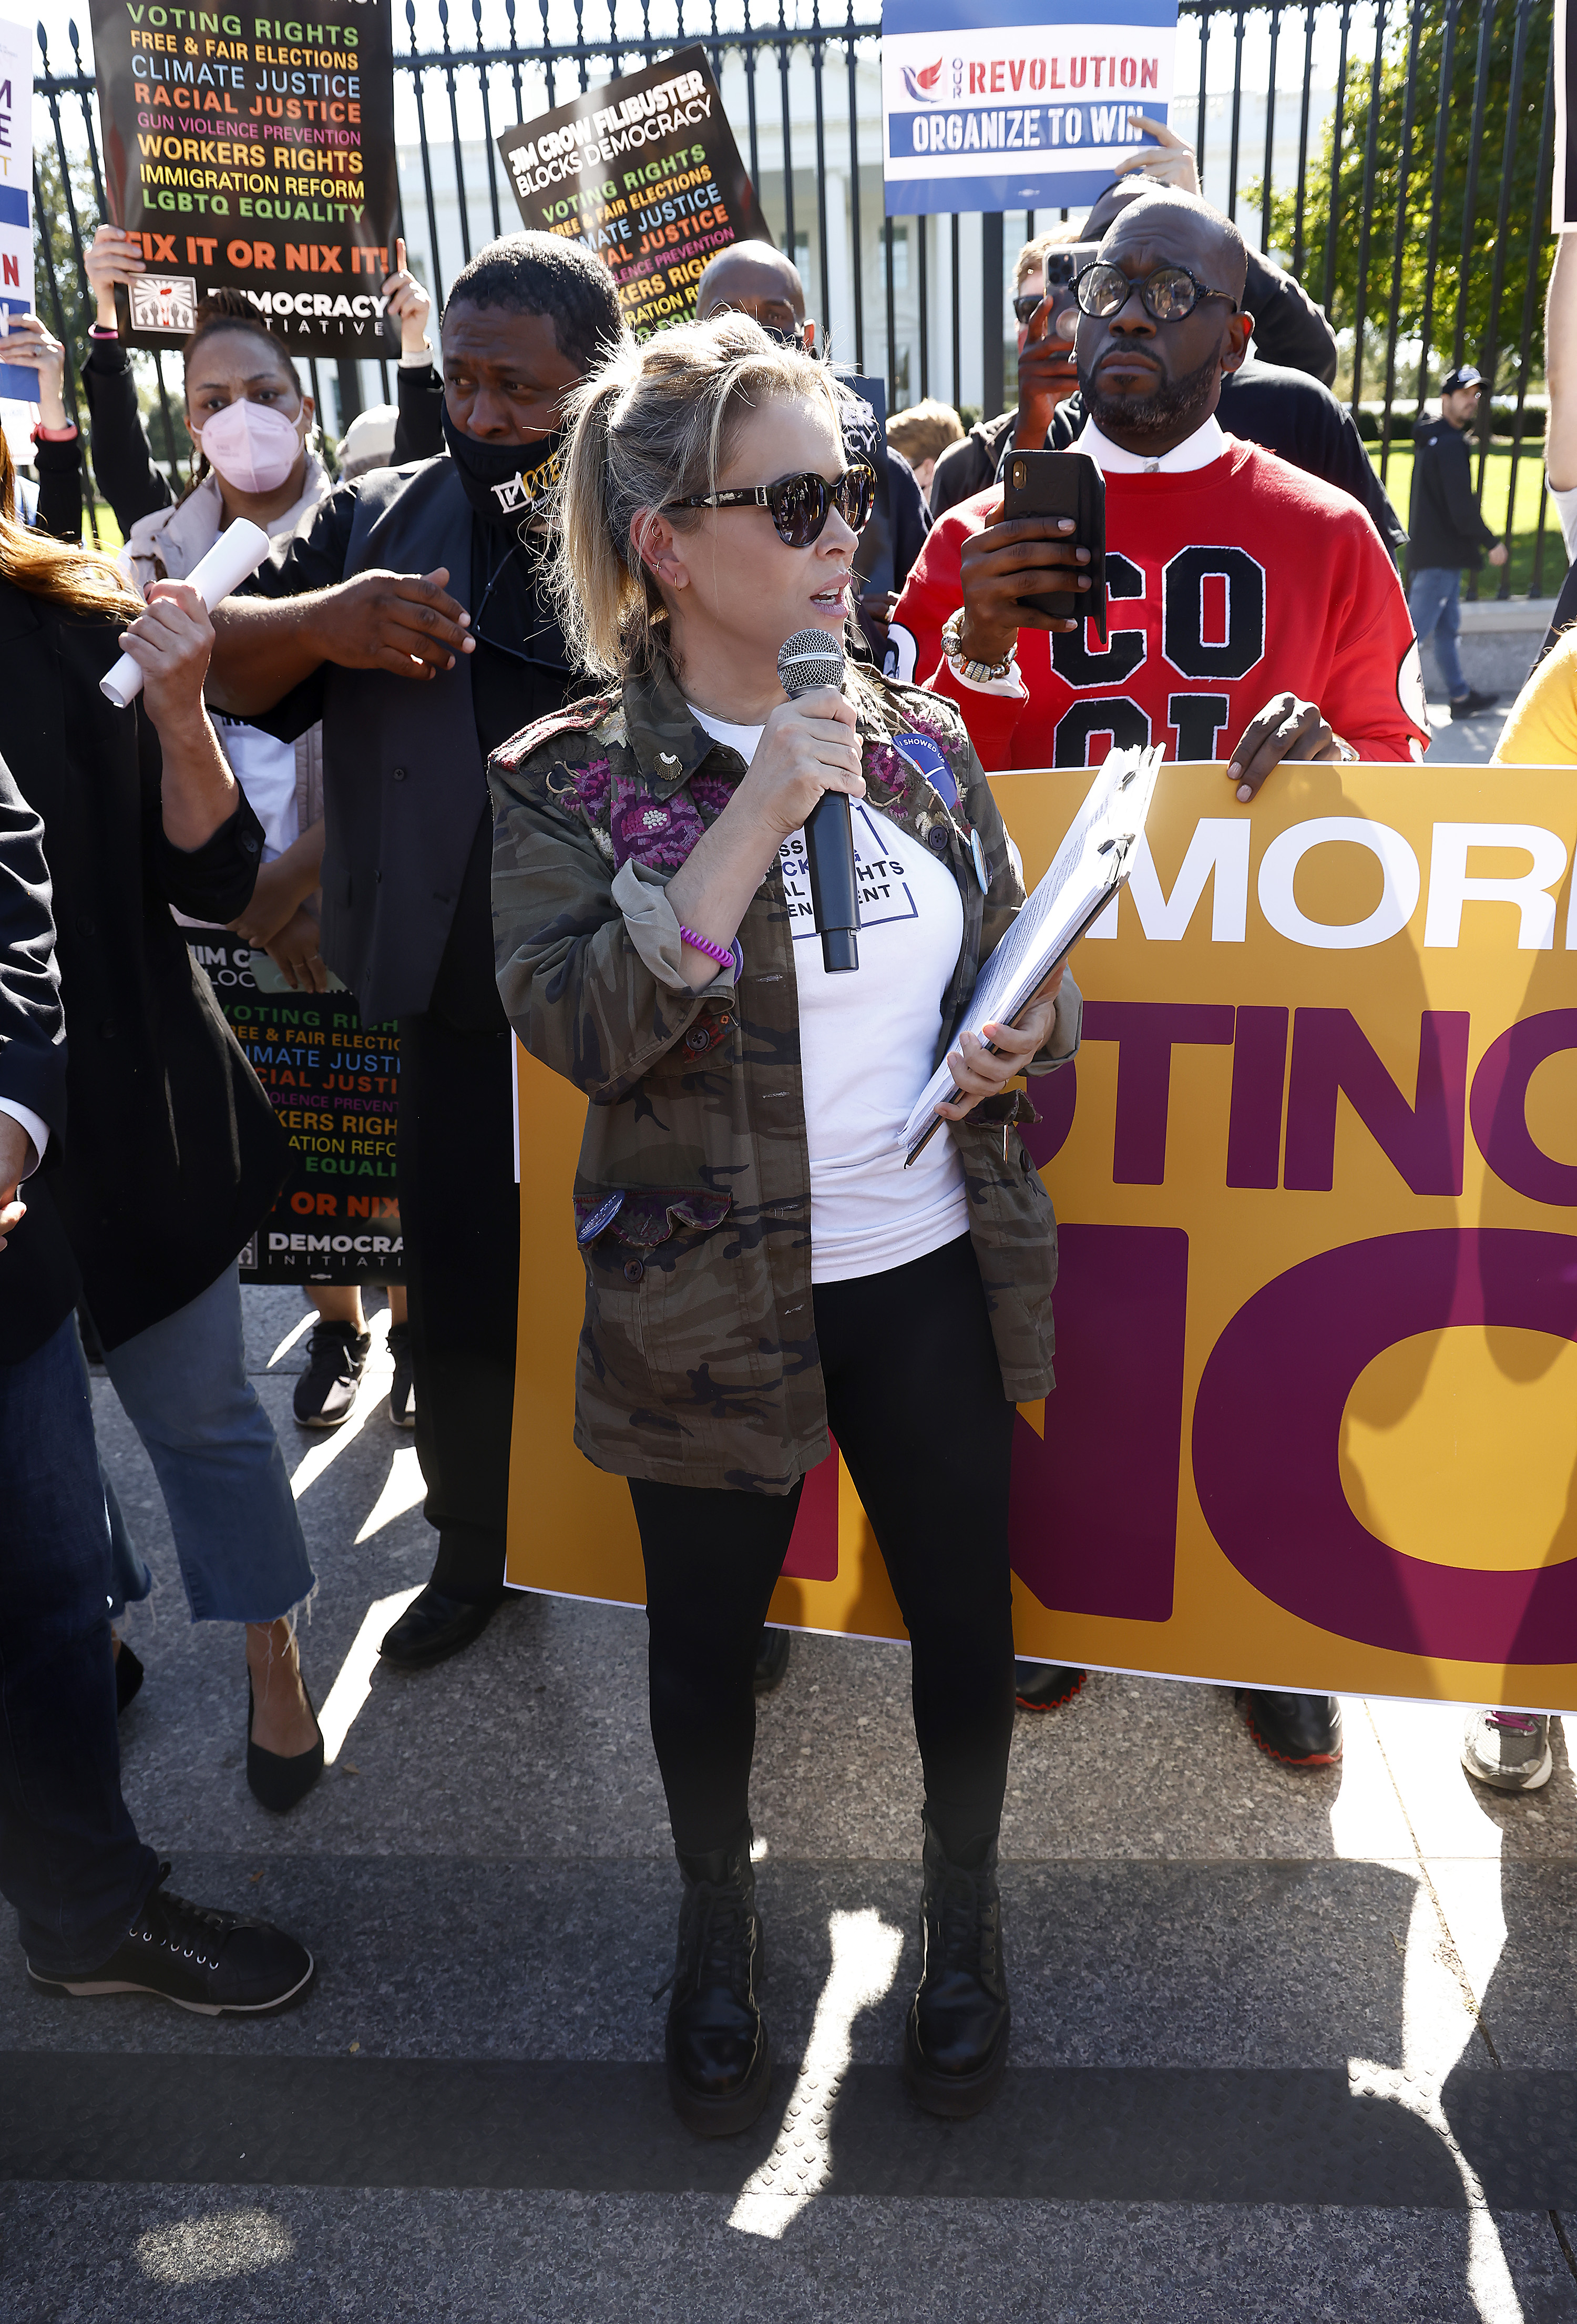 Alyssa Milano speaks at the "No More Excuses: Voting Rights Now" rally held in front of The White House in Washington, DC, on October 19, 2021. | Source: Getty Images